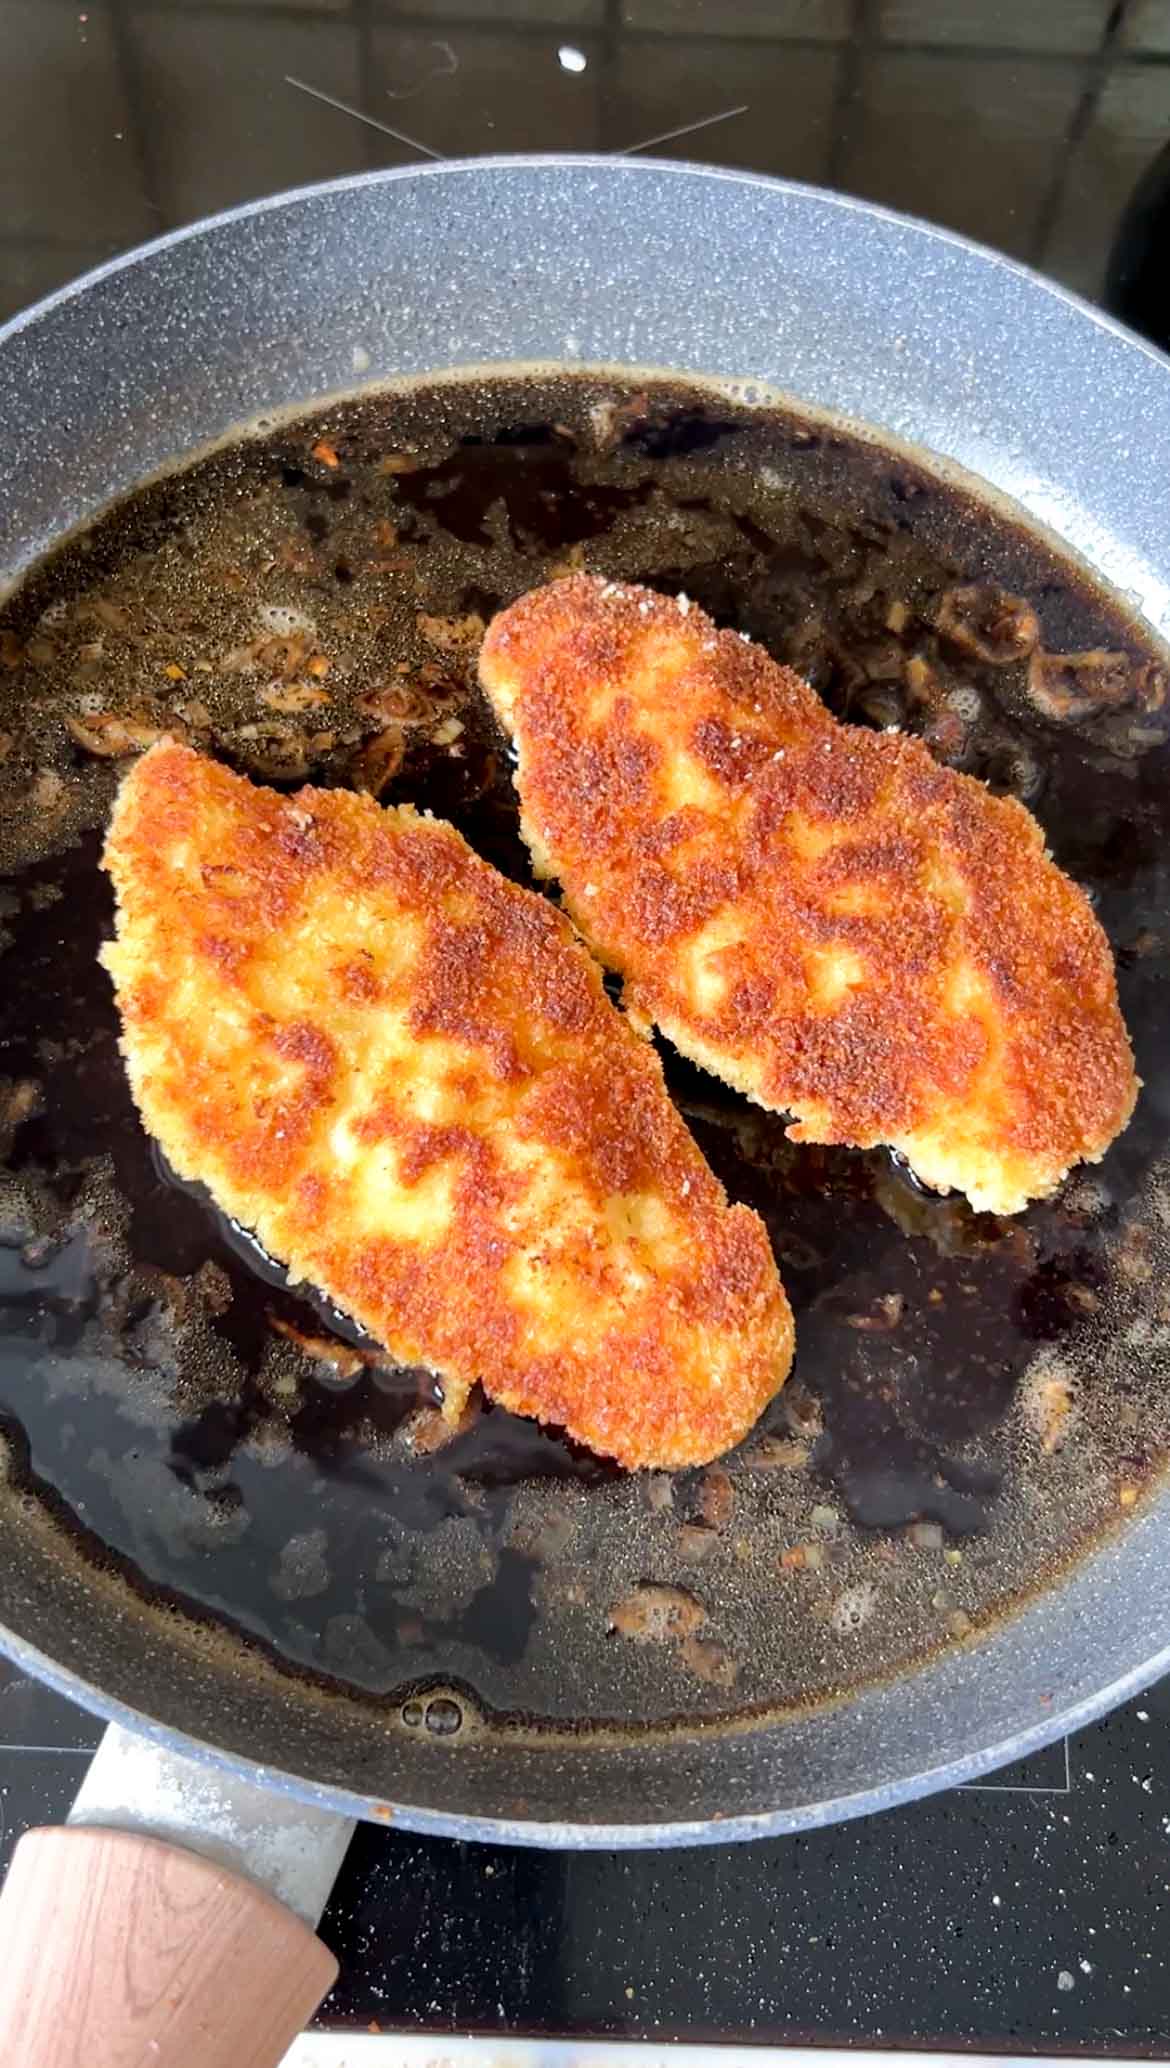 Breaded chicken cutlets back in the frying pan of sauce.